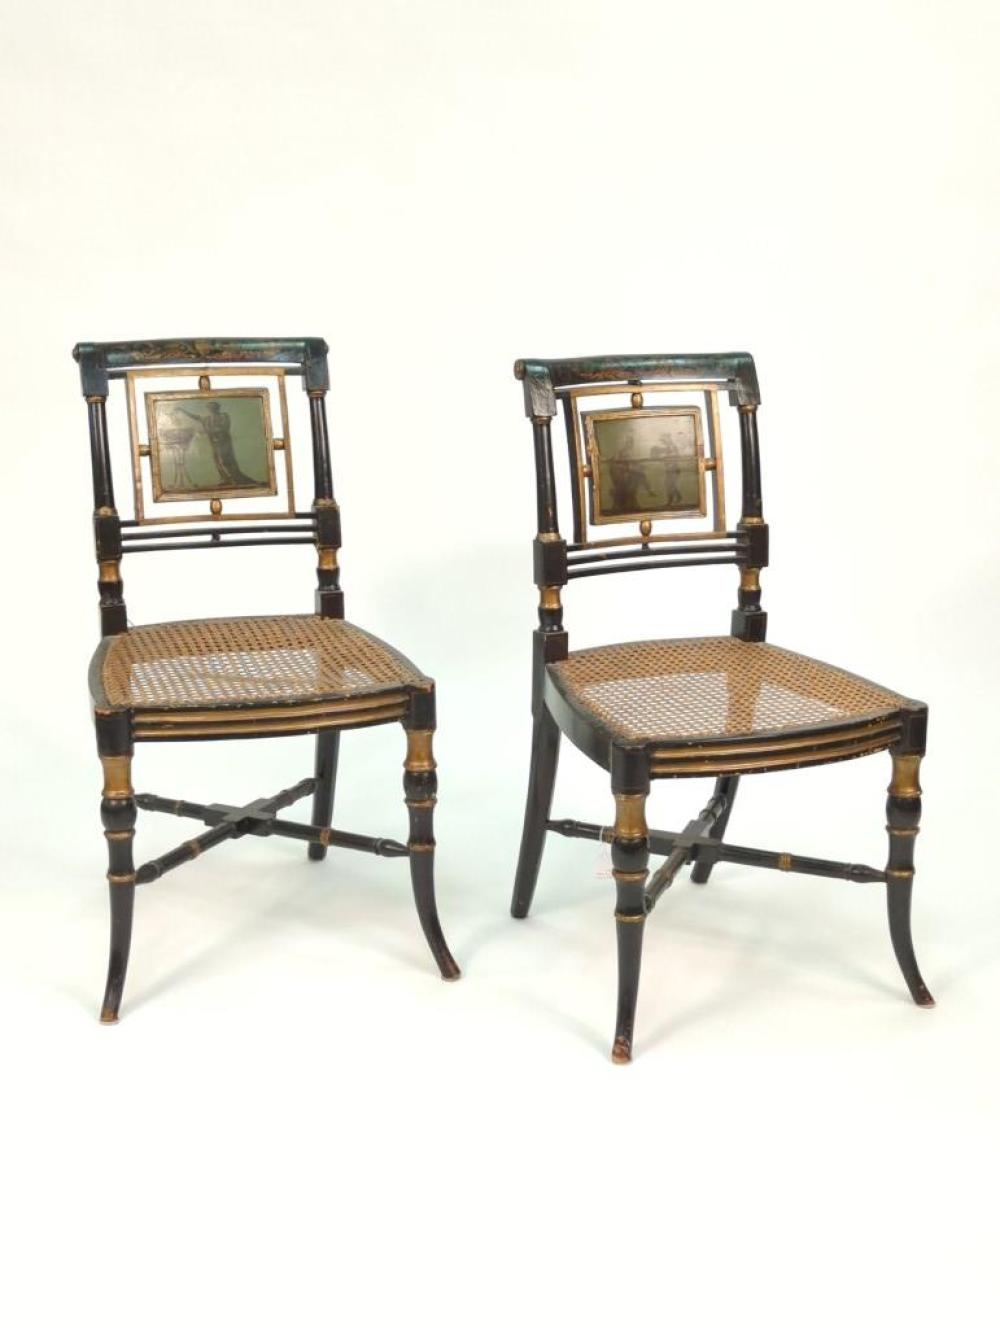 PAIR NEOCLASSICAL EBONIZED AND 2d7a4f